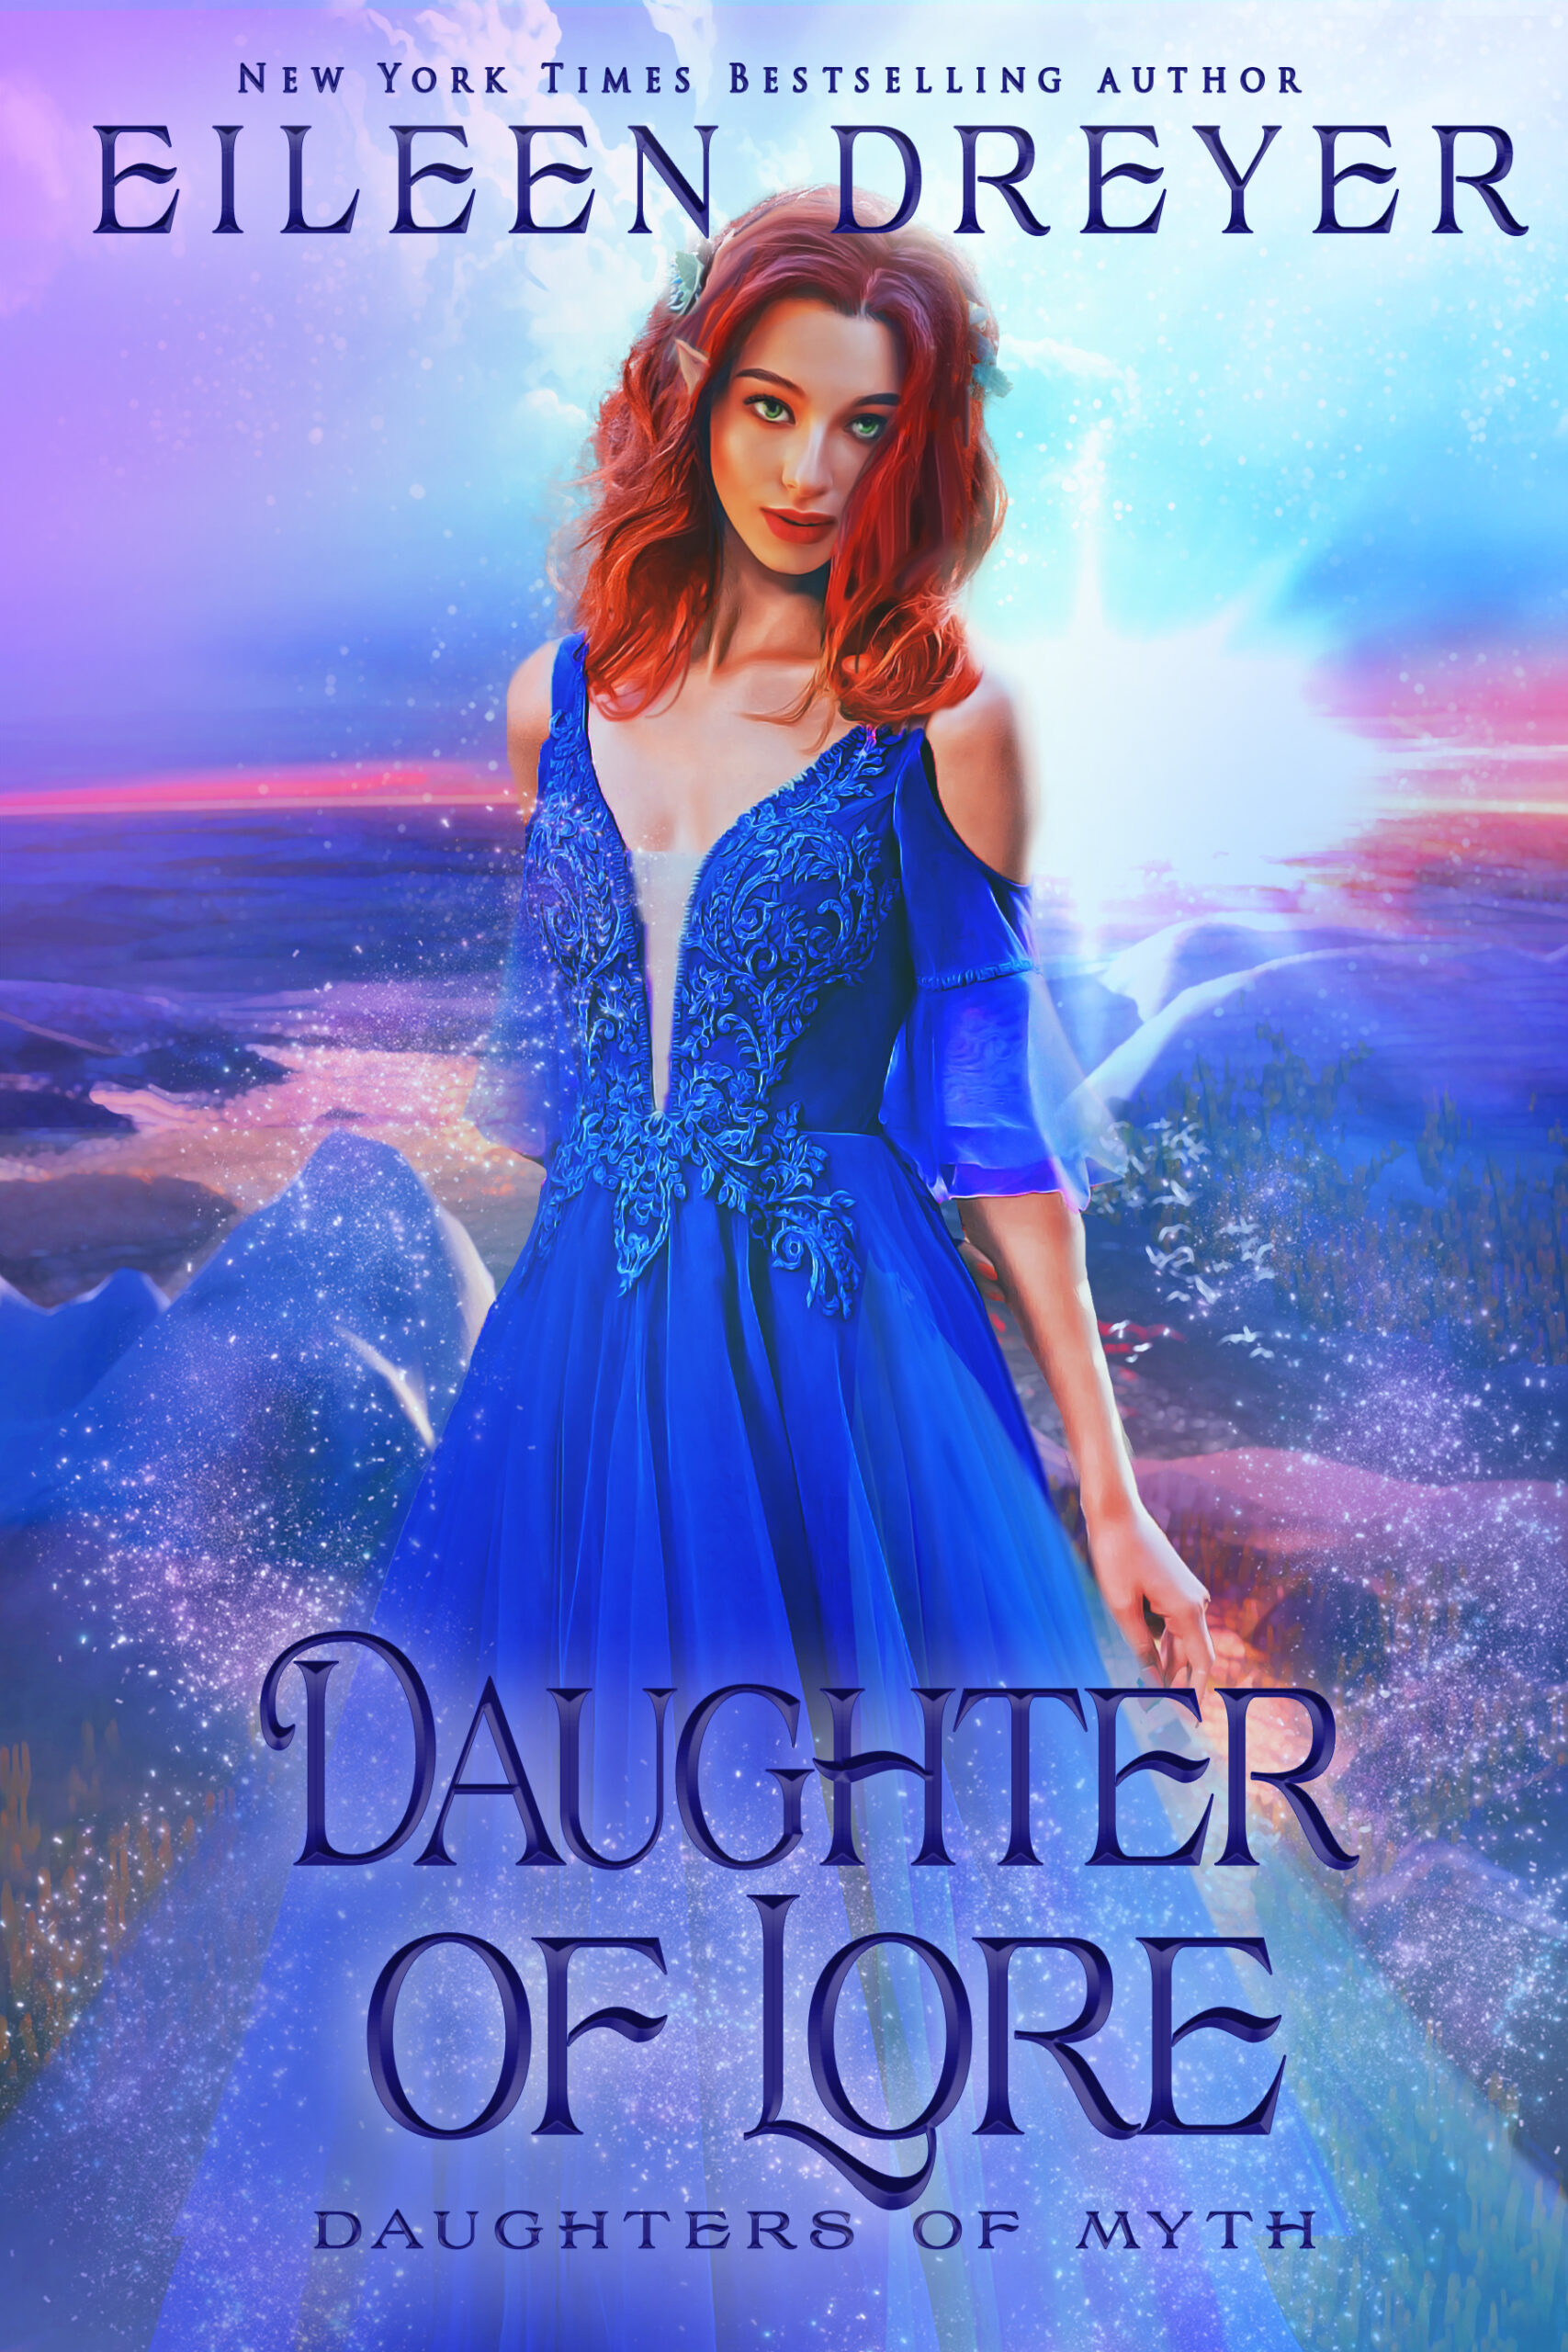 Daughter of Lore by Eileen Dreyer